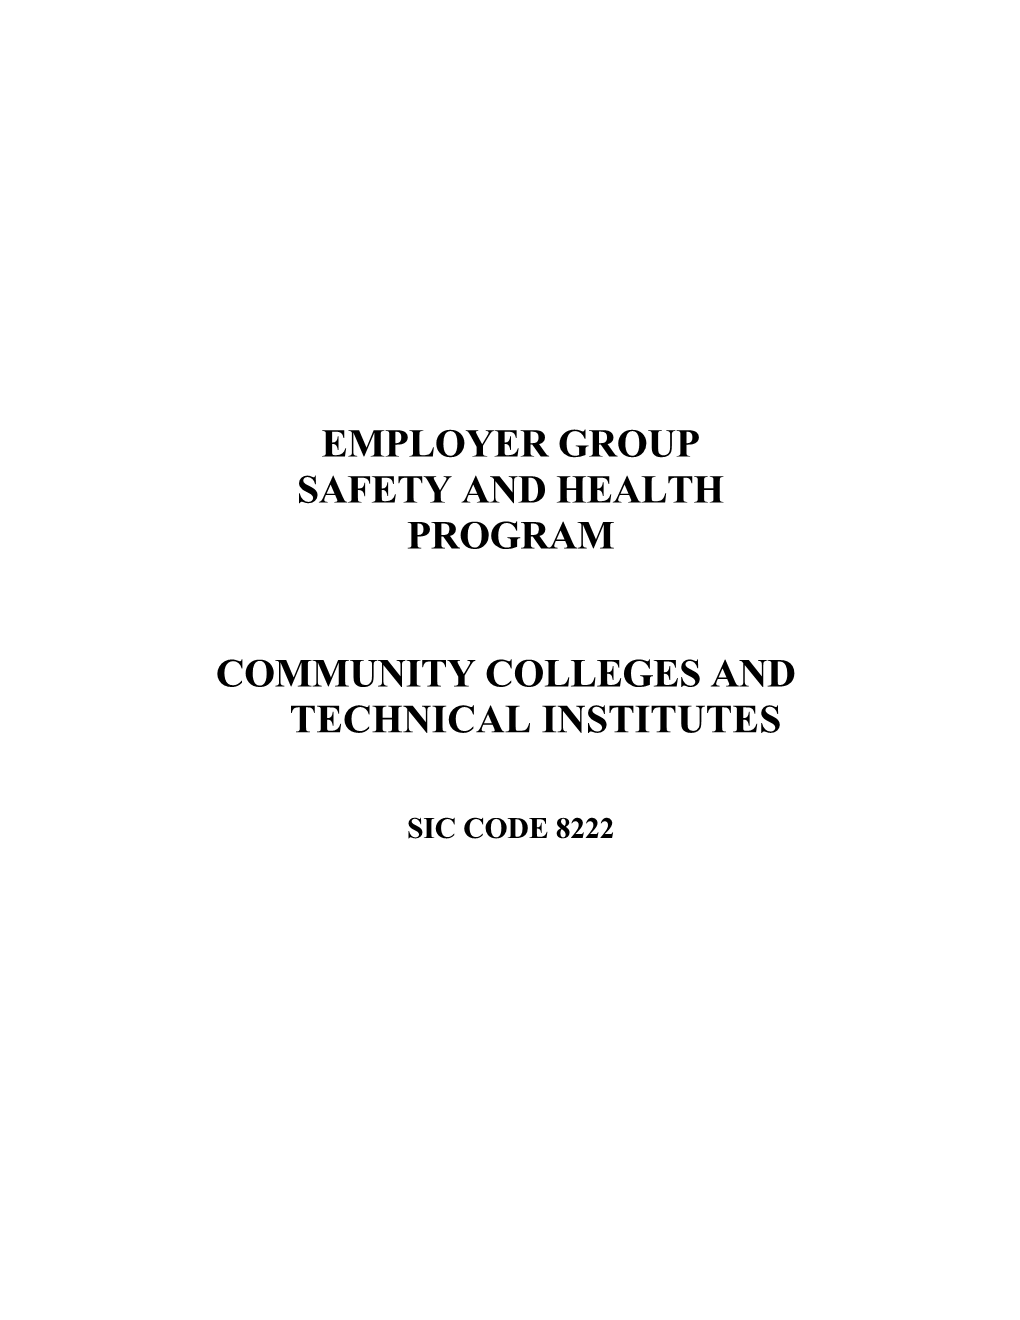 Community Colleges Safety Program